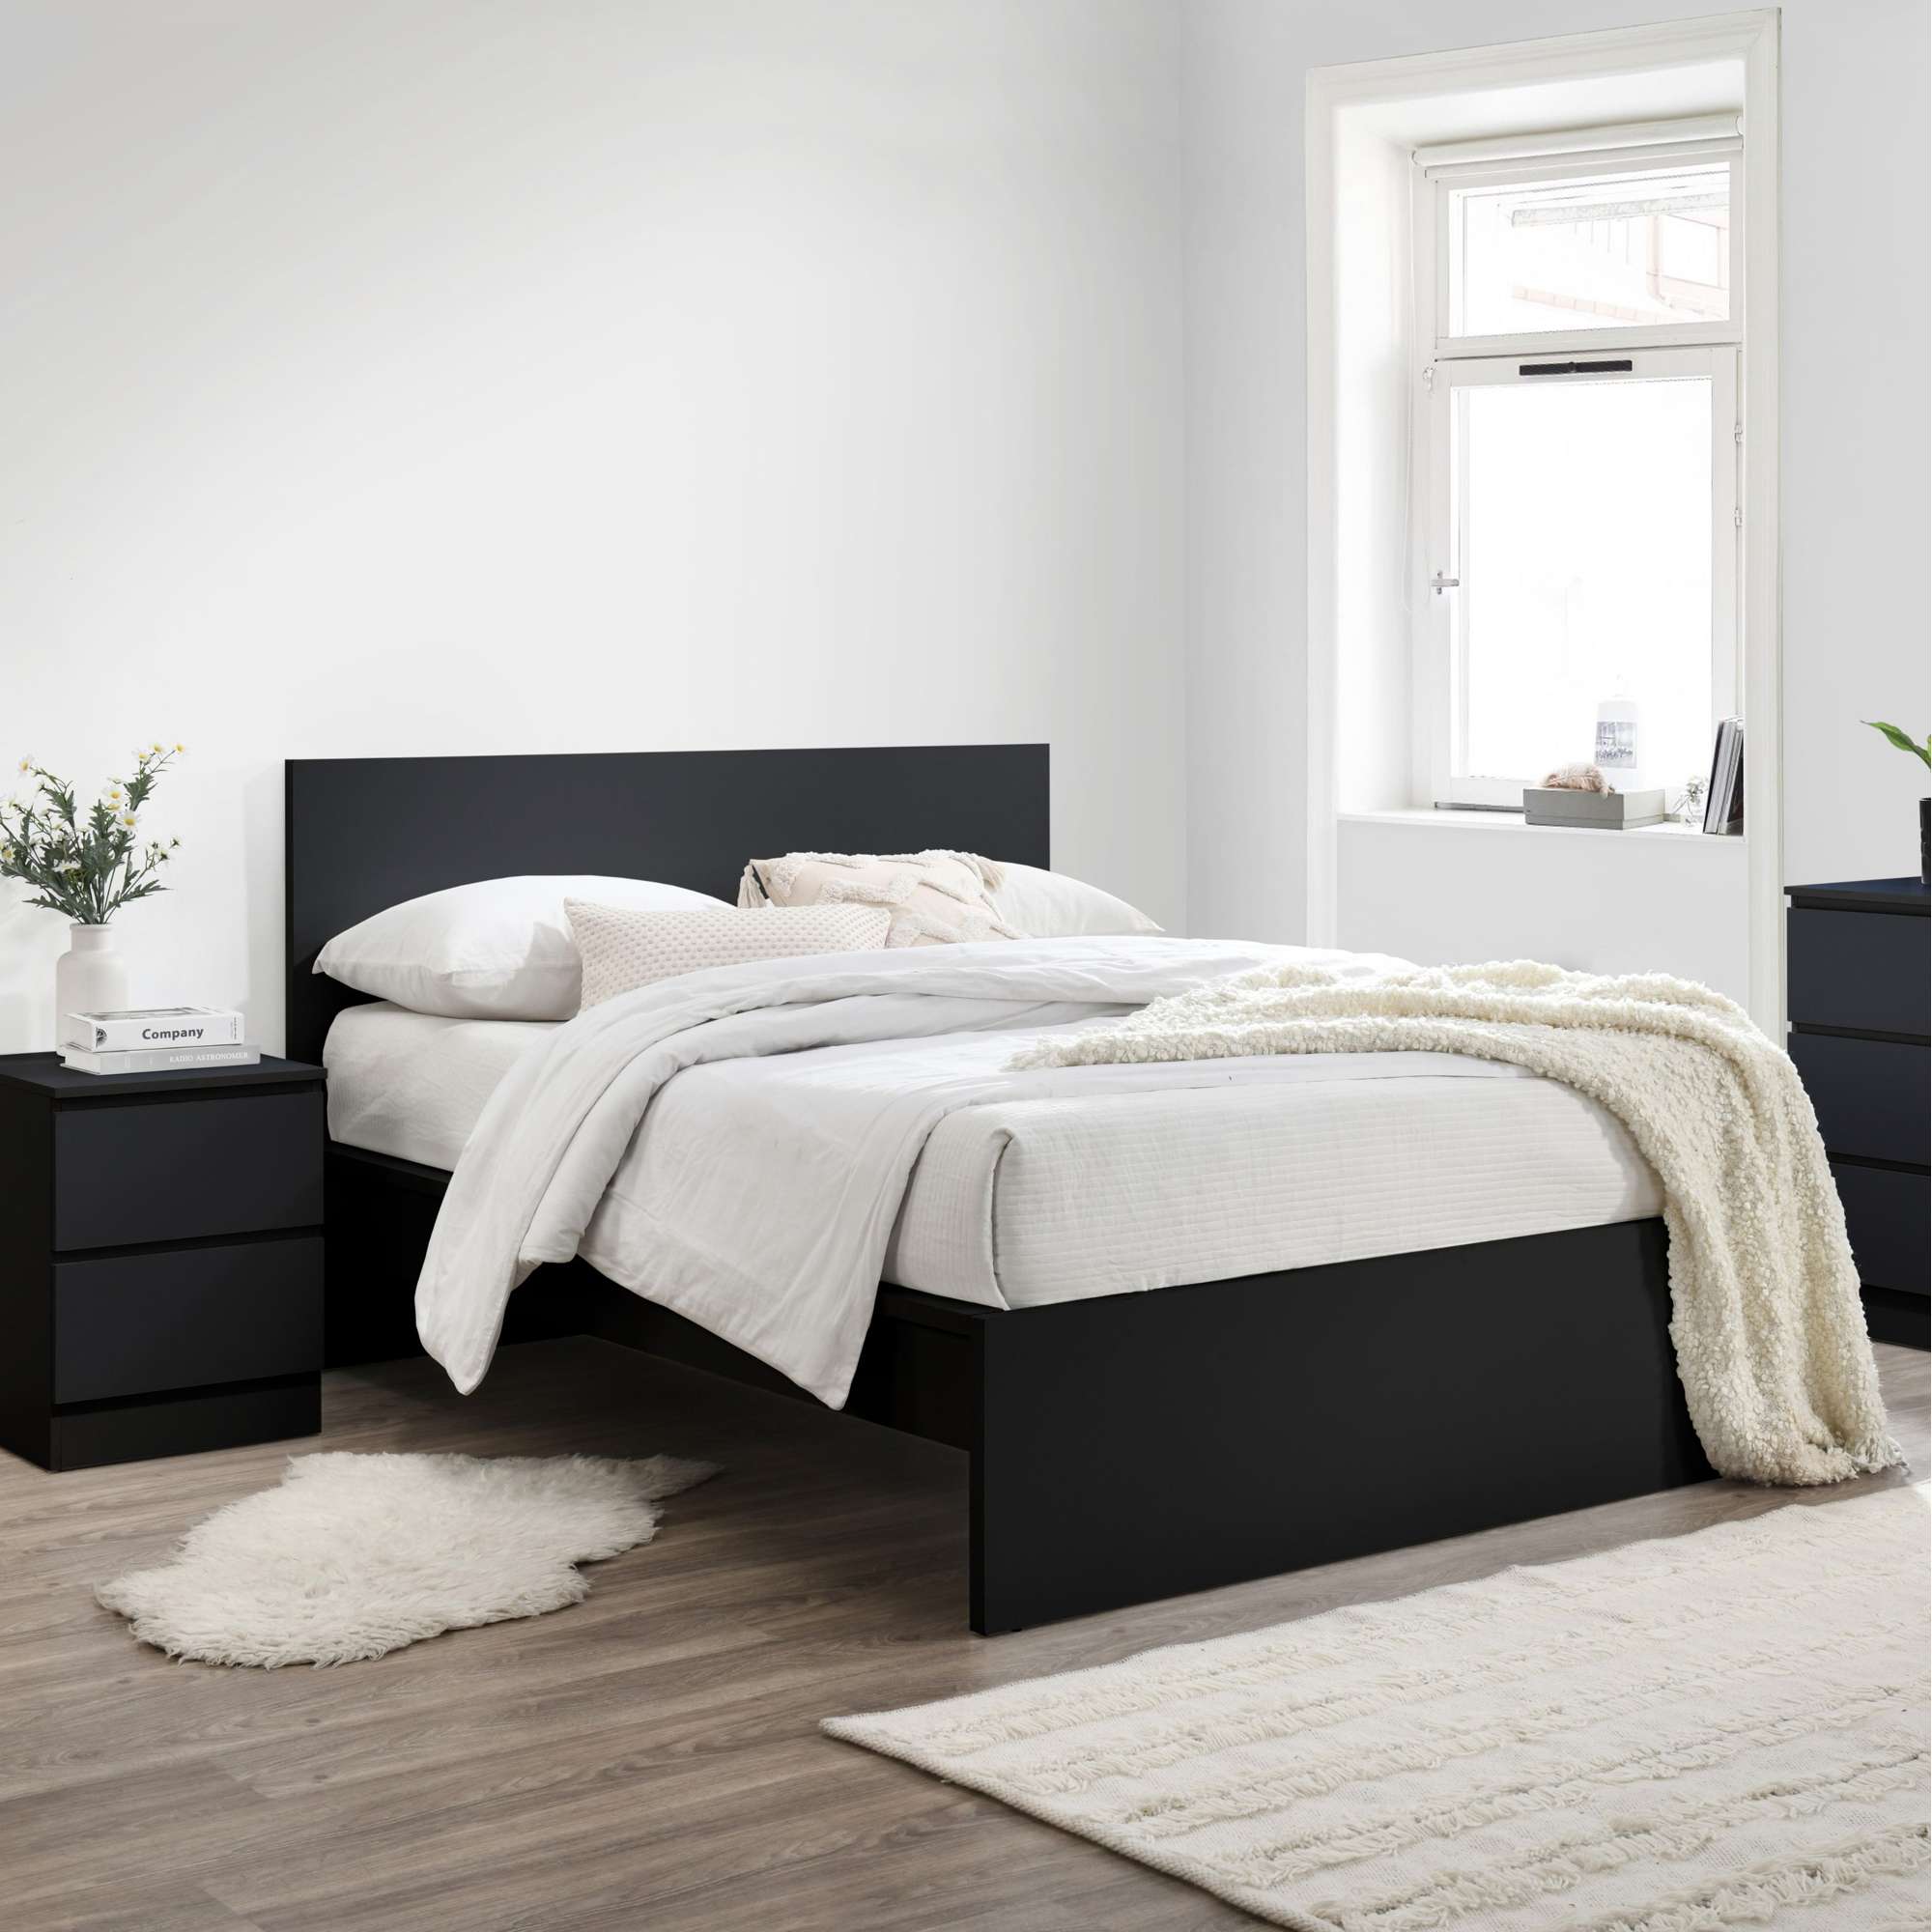 Oslo Bed Frame